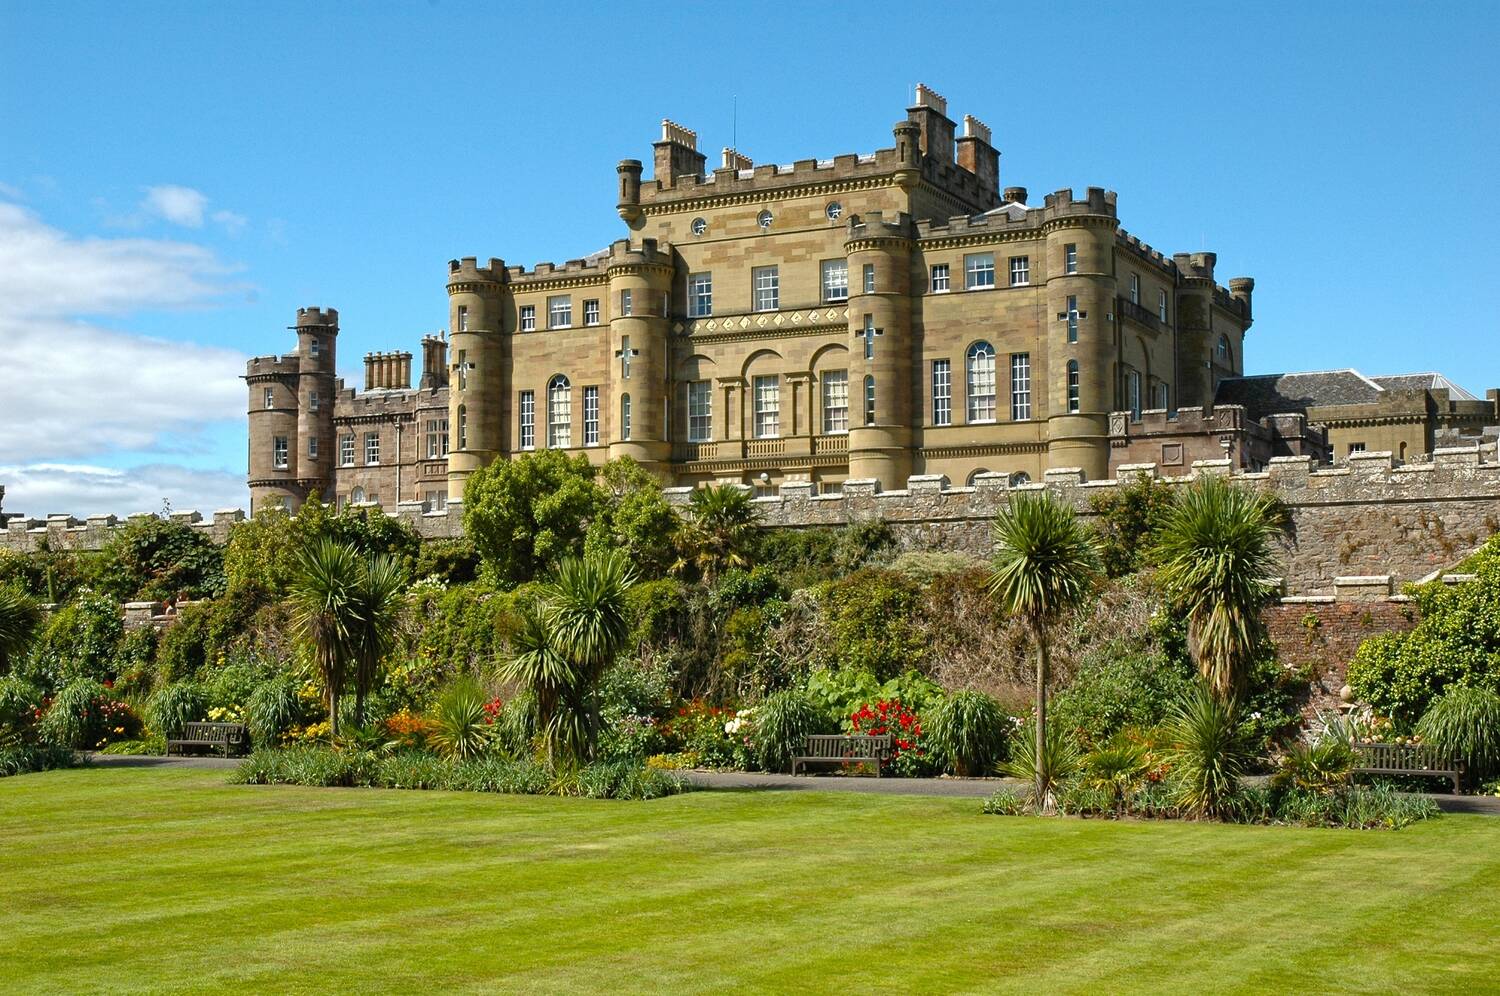 A view looking up and across a large manicured lawn to Culzean Castle. It is a bright sunny day.